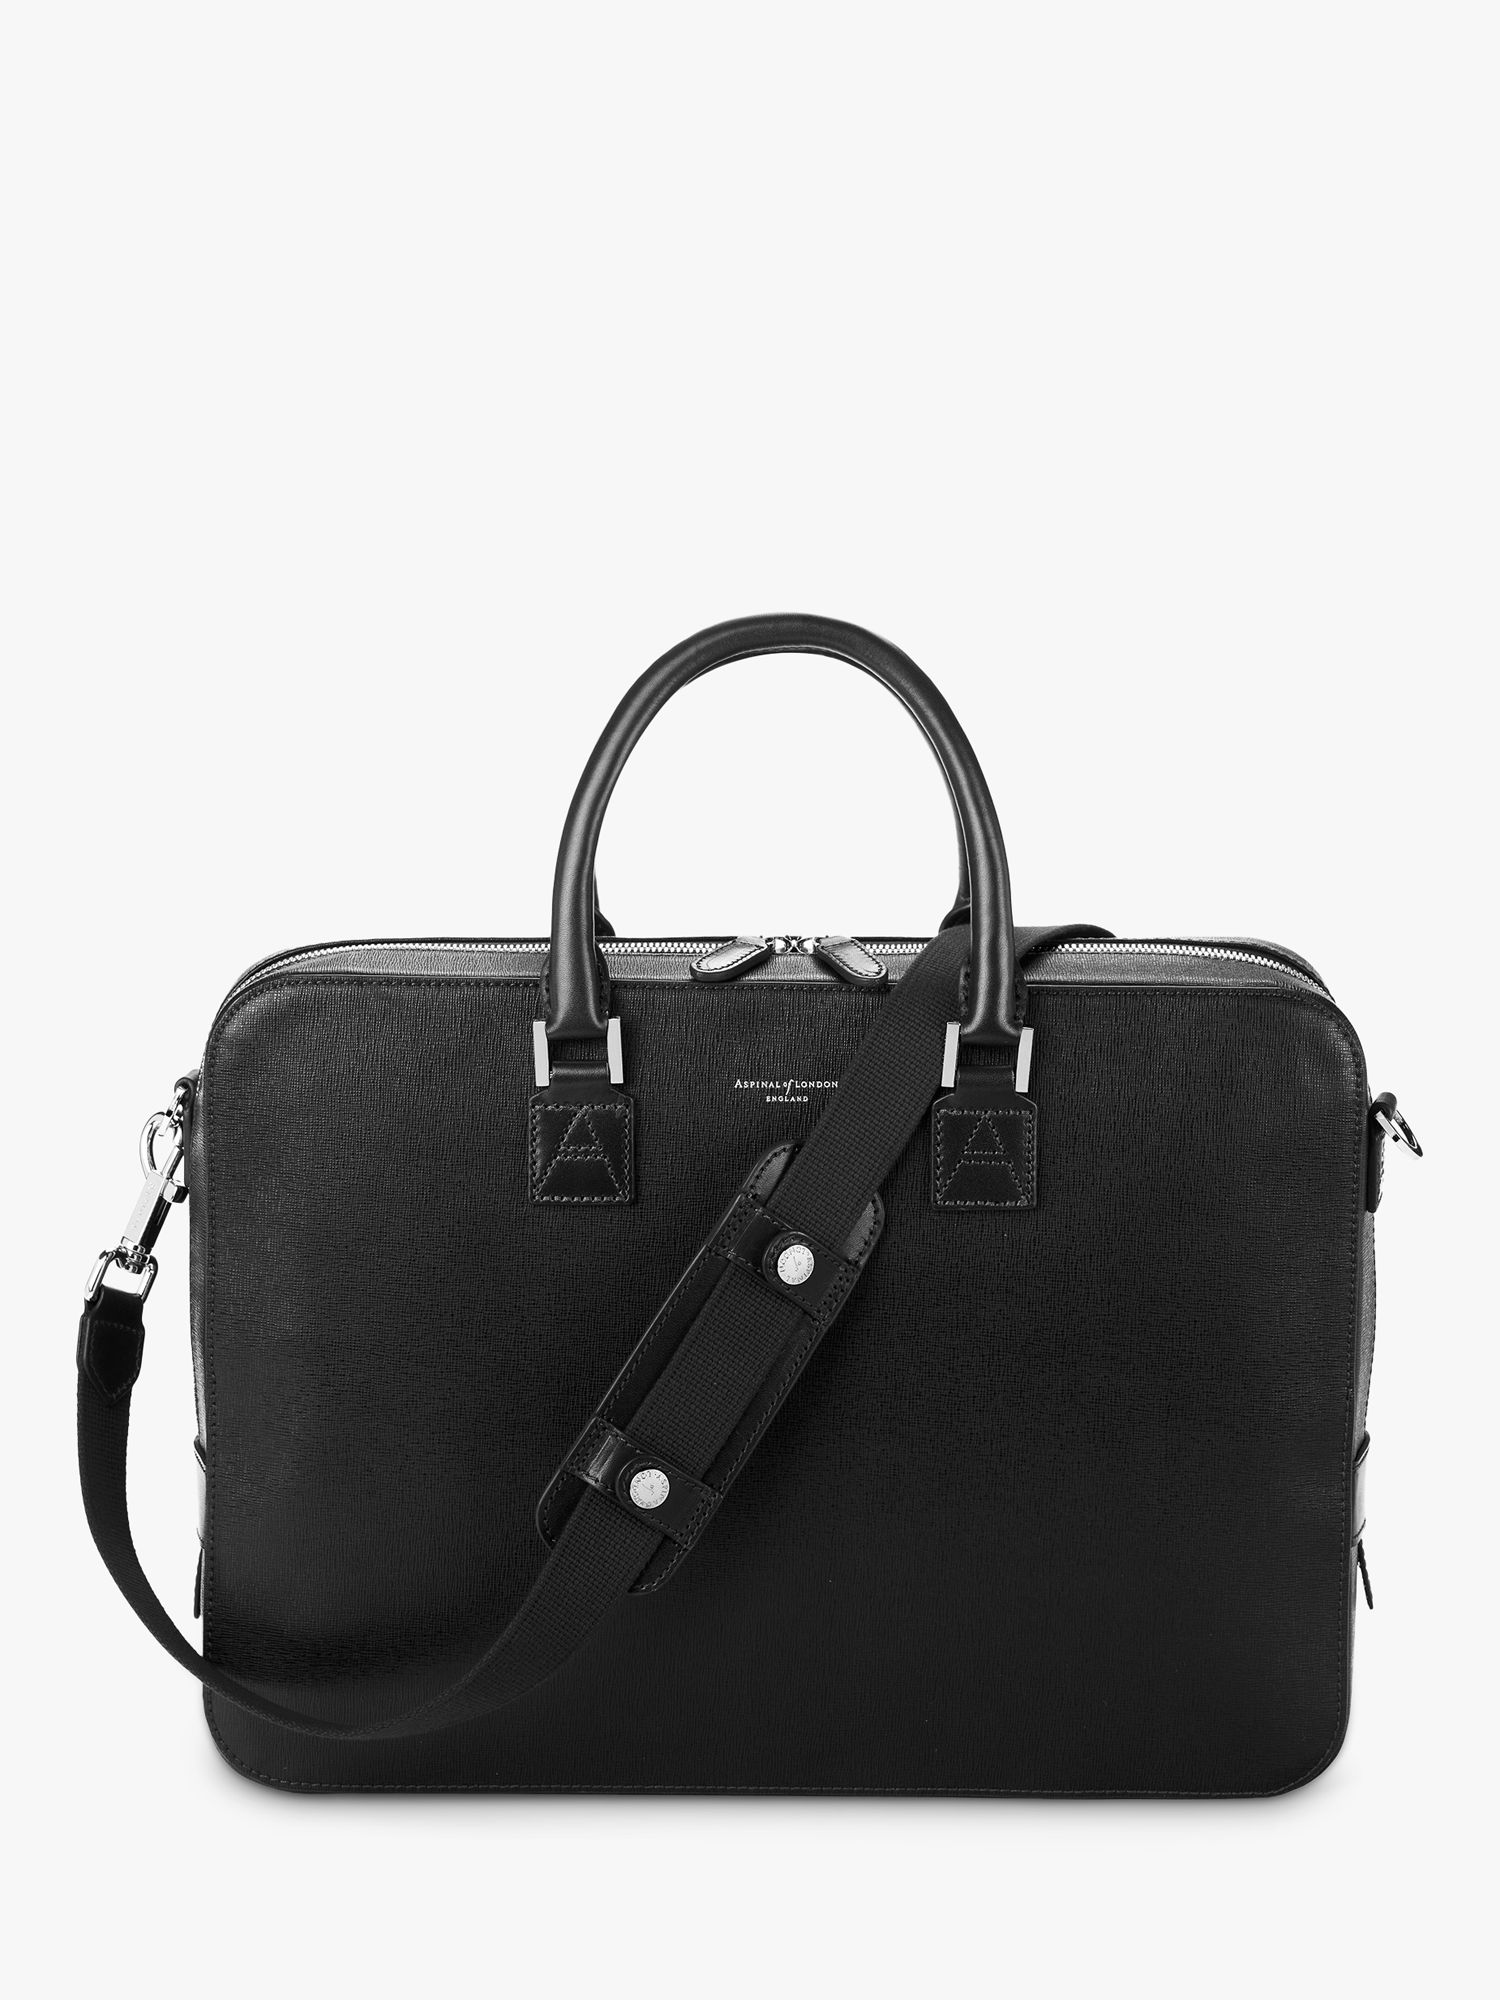 Aspinal of London Mount Street Small Saffiano Leather Laptop Bag, Black ...